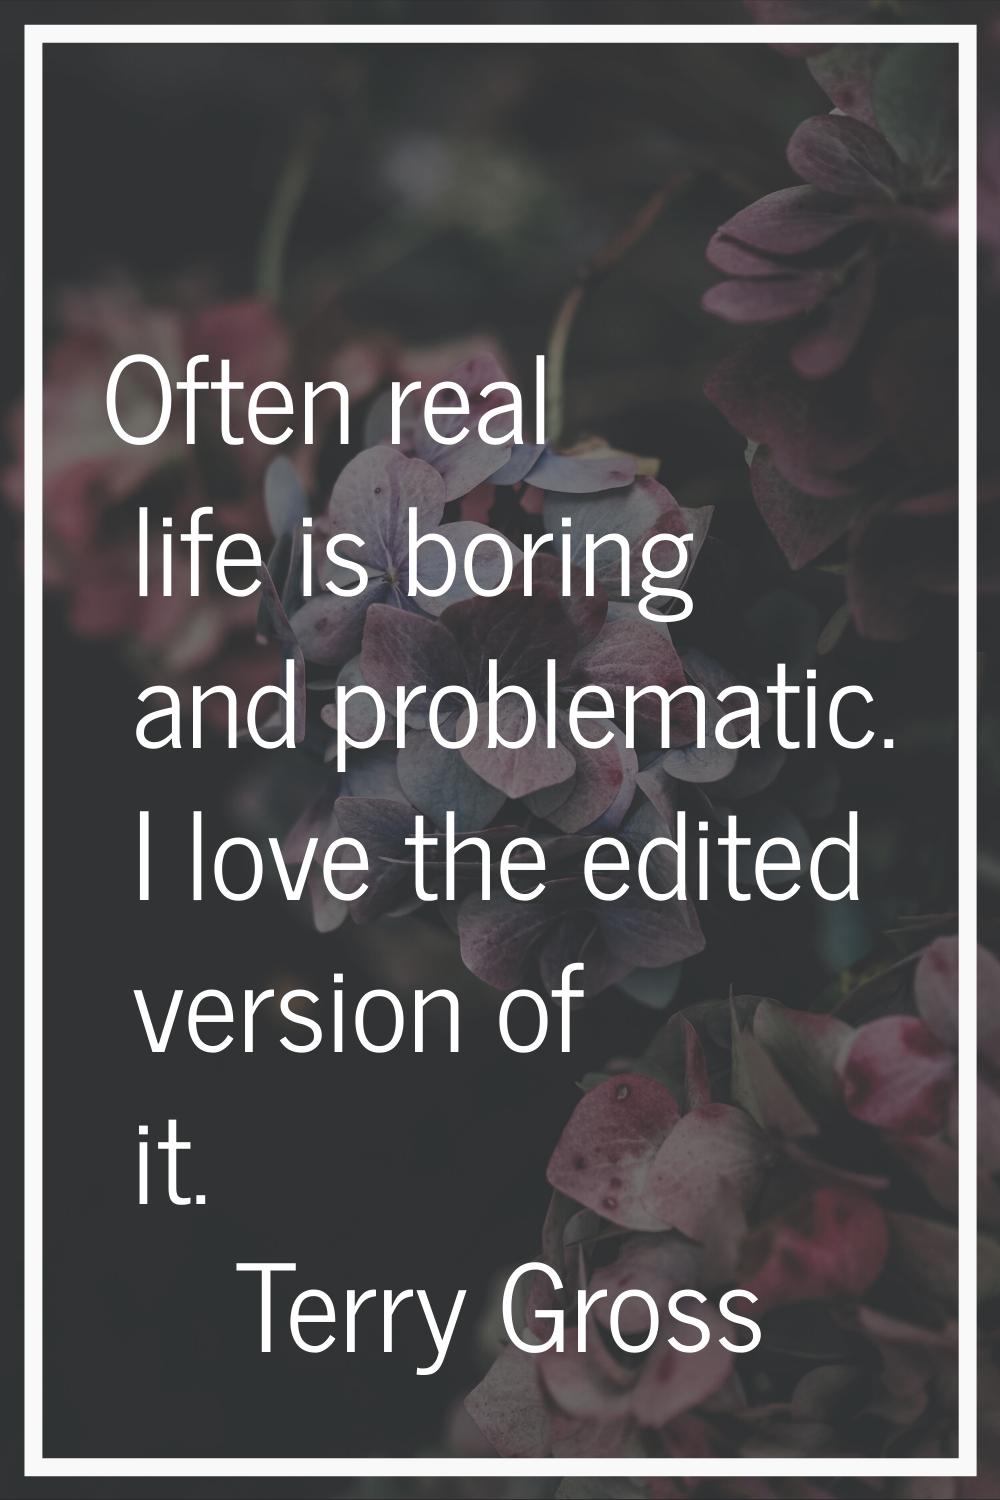 Often real life is boring and problematic. I love the edited version of it.